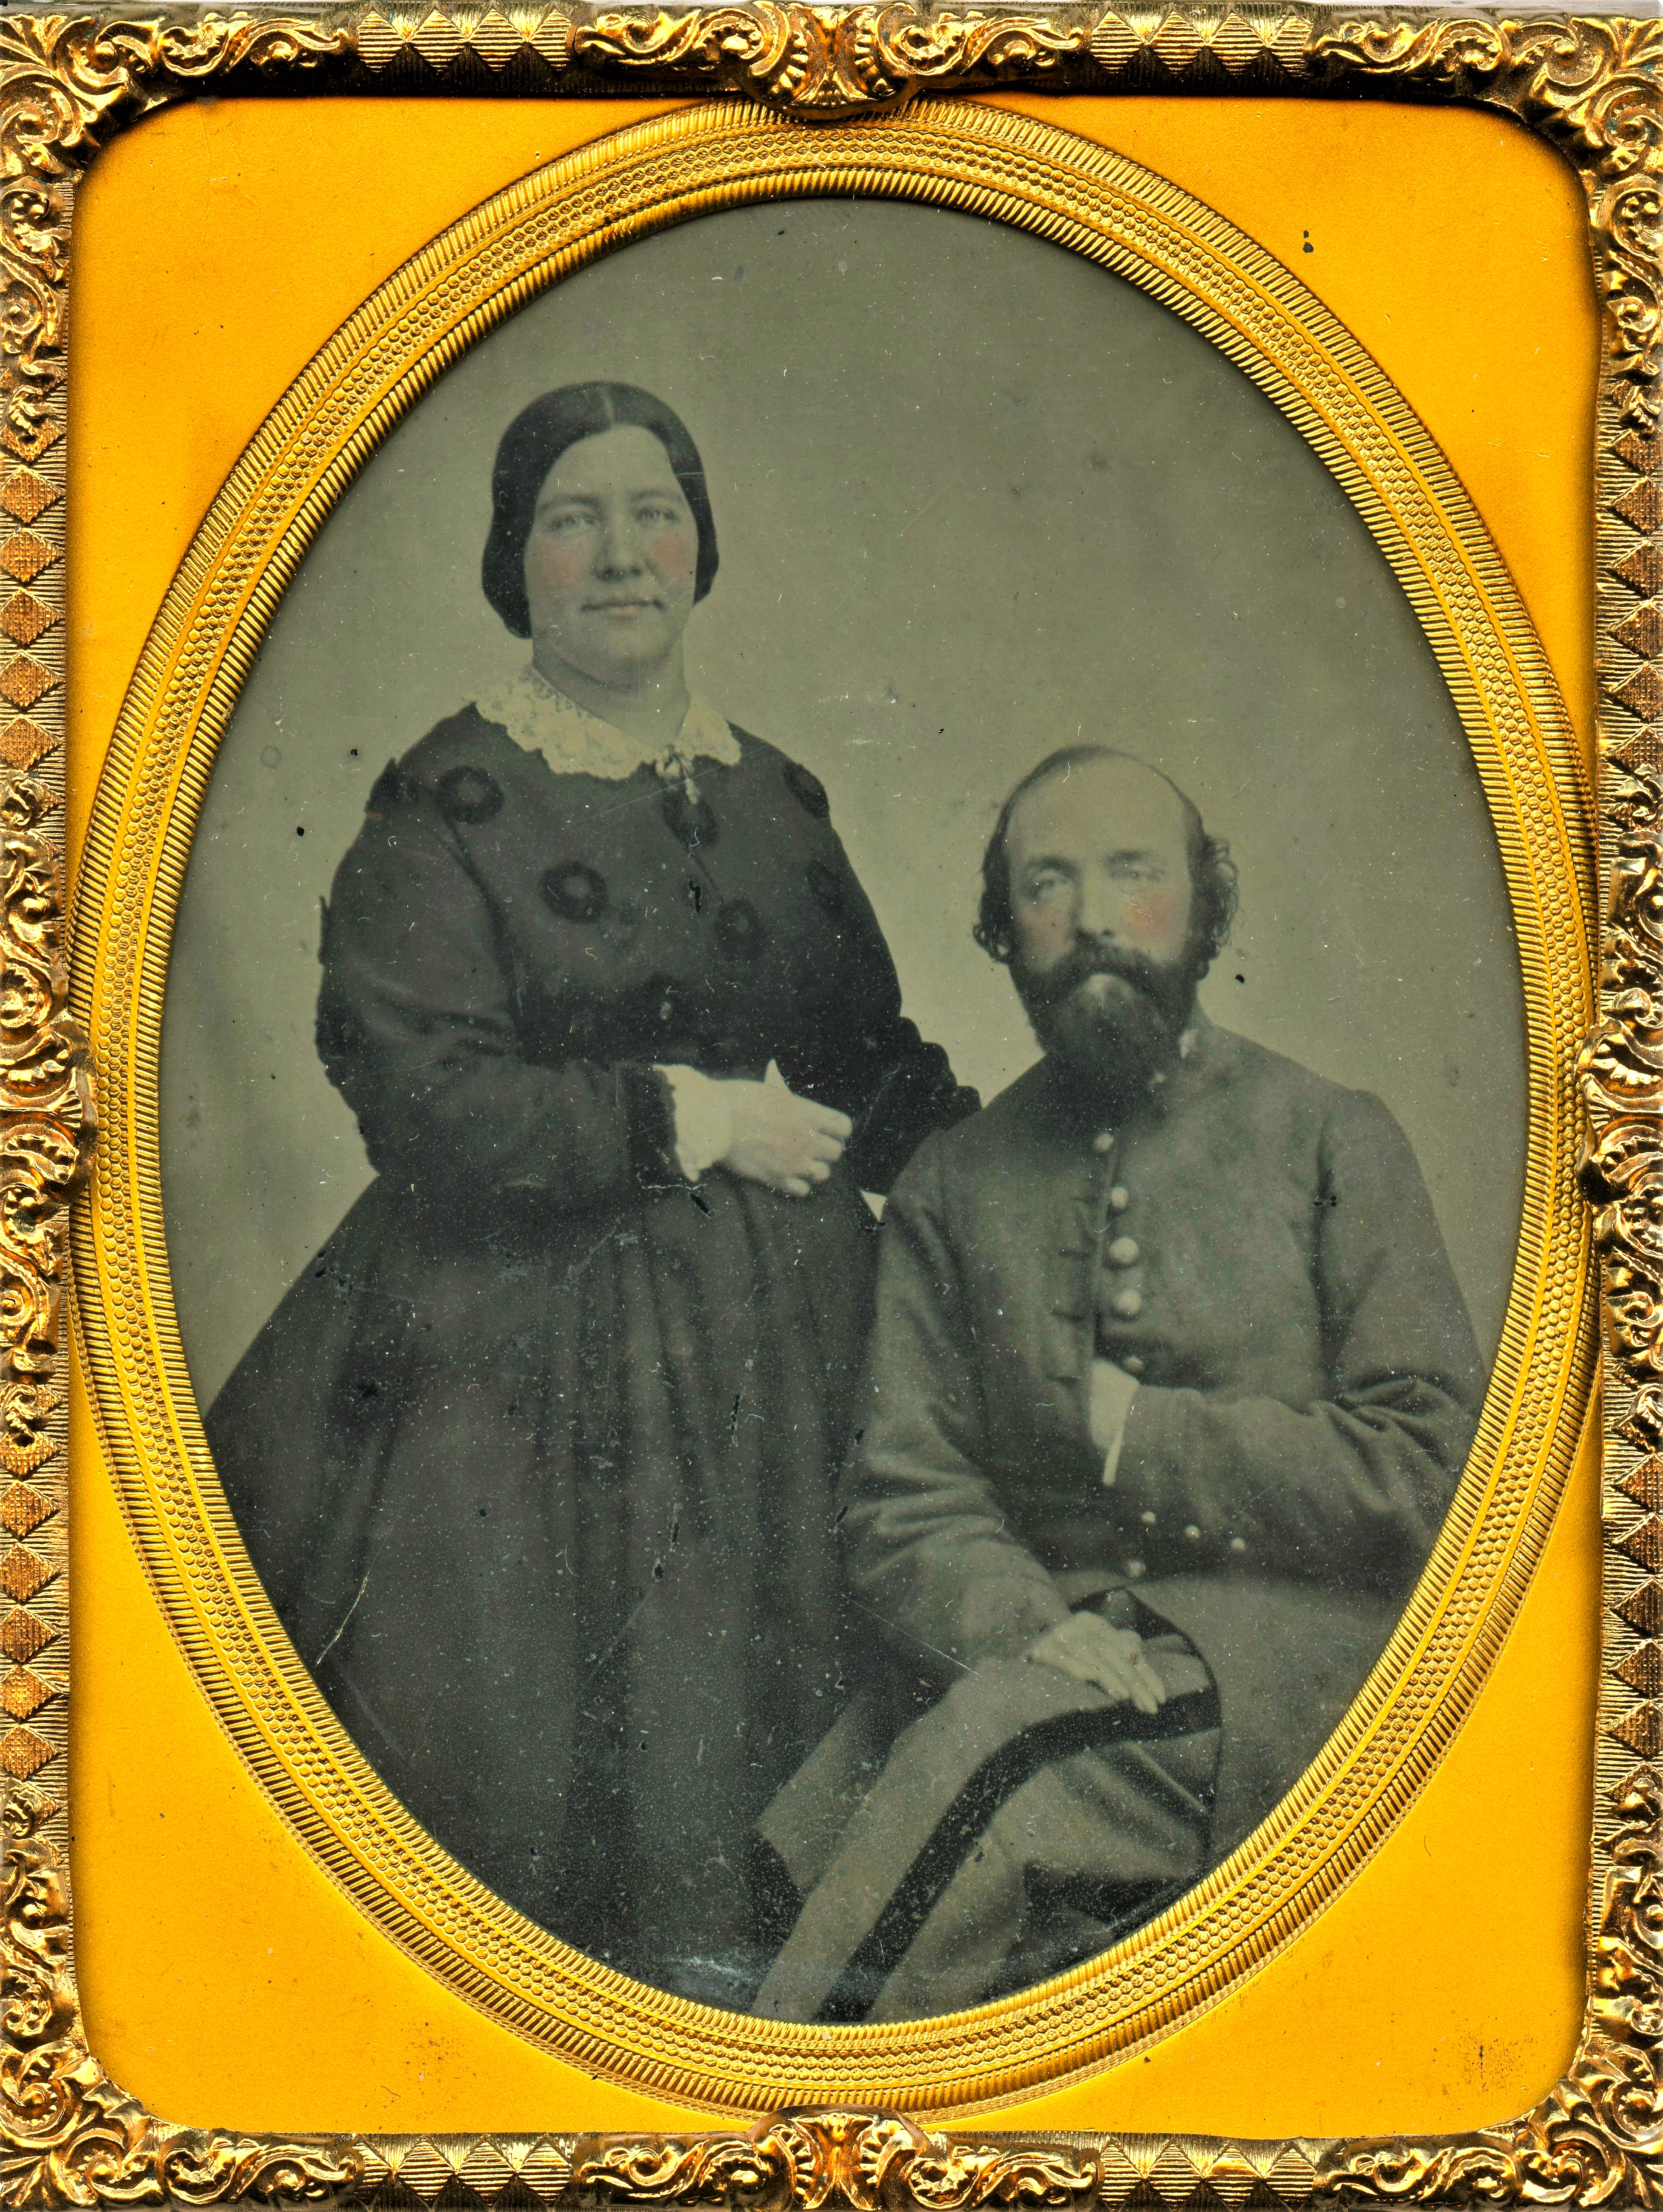 Half Plate and Quarter Plate Ambrotypes of Confederate Lt. Colonel and Wife